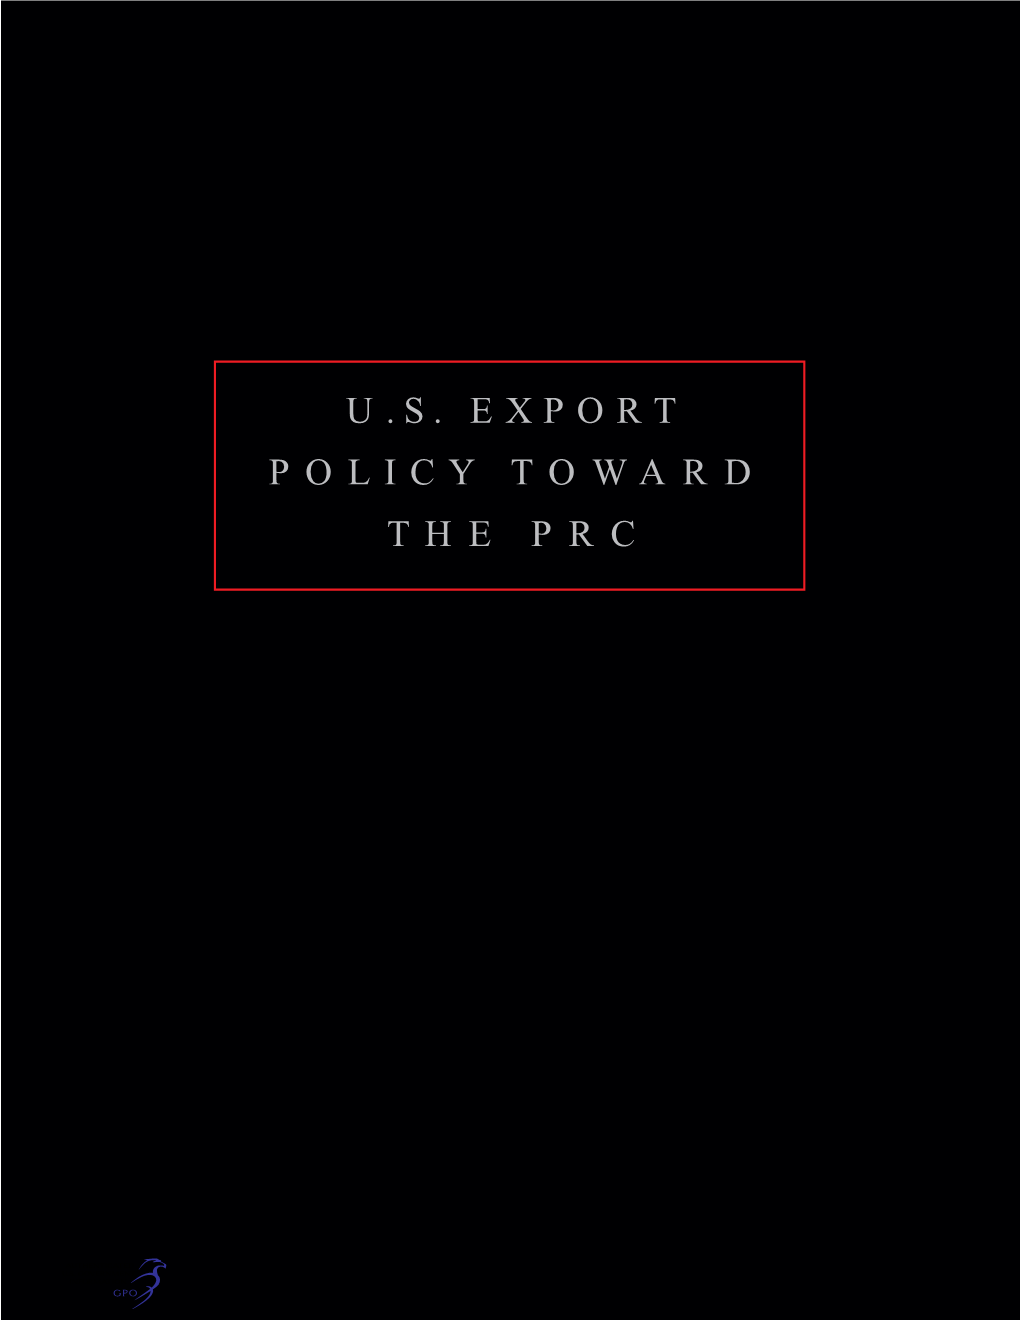 Export Control Policy Toward the PRC